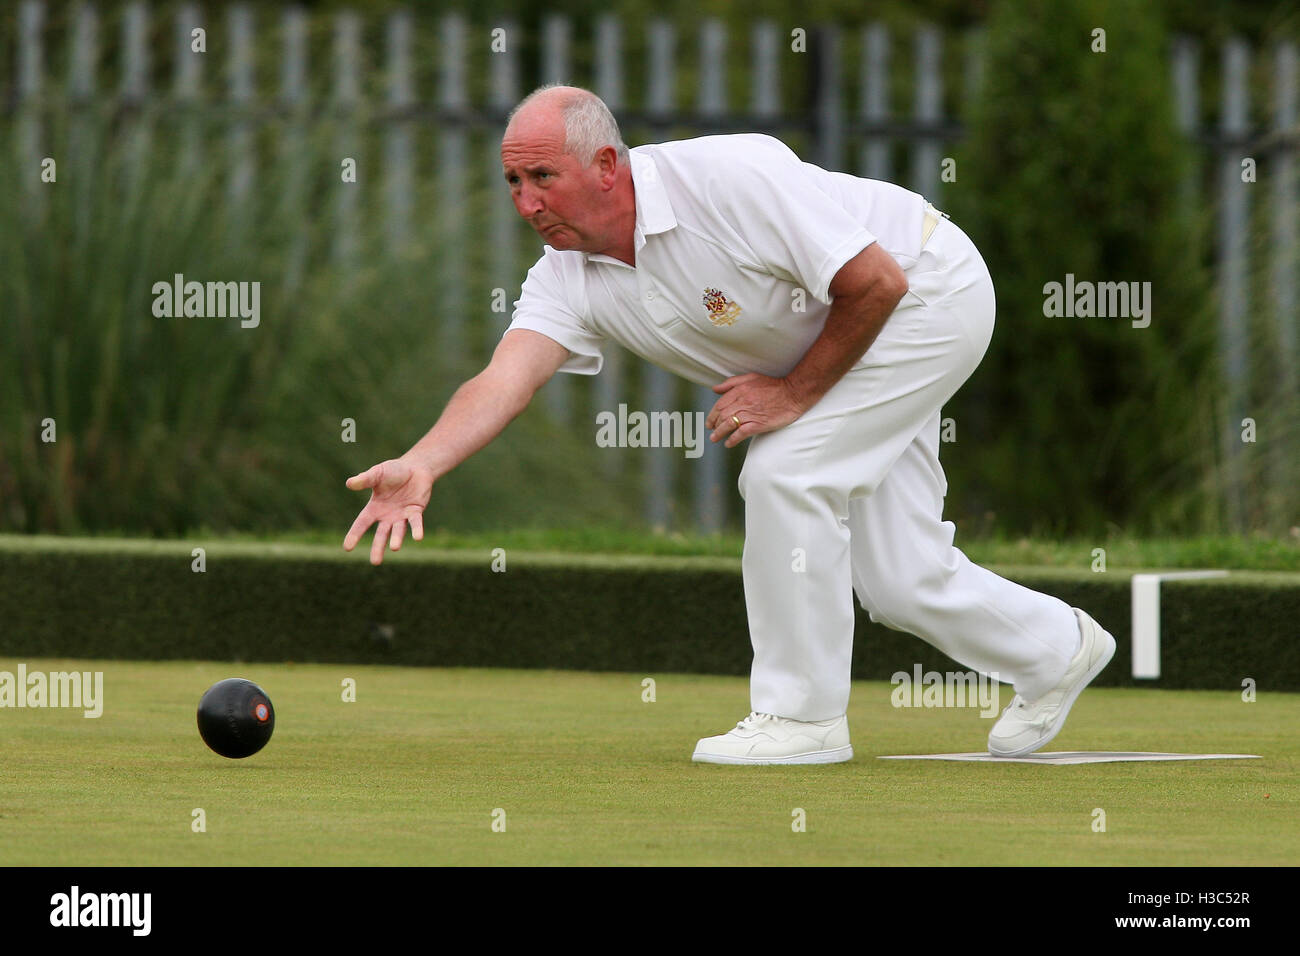 T Brown, B Payne, C Martin, B Sutton (Kings Chase BC, blue shirts) vs R Cue, M Rigby, T Able, T Bridge (Haynes Park BC) - Rink Mailer Cup - Romford & District Bowls Association Finals Day at Harold Hill Bowls Club, Broxhill Centre - 05/09/10 Stock Photo